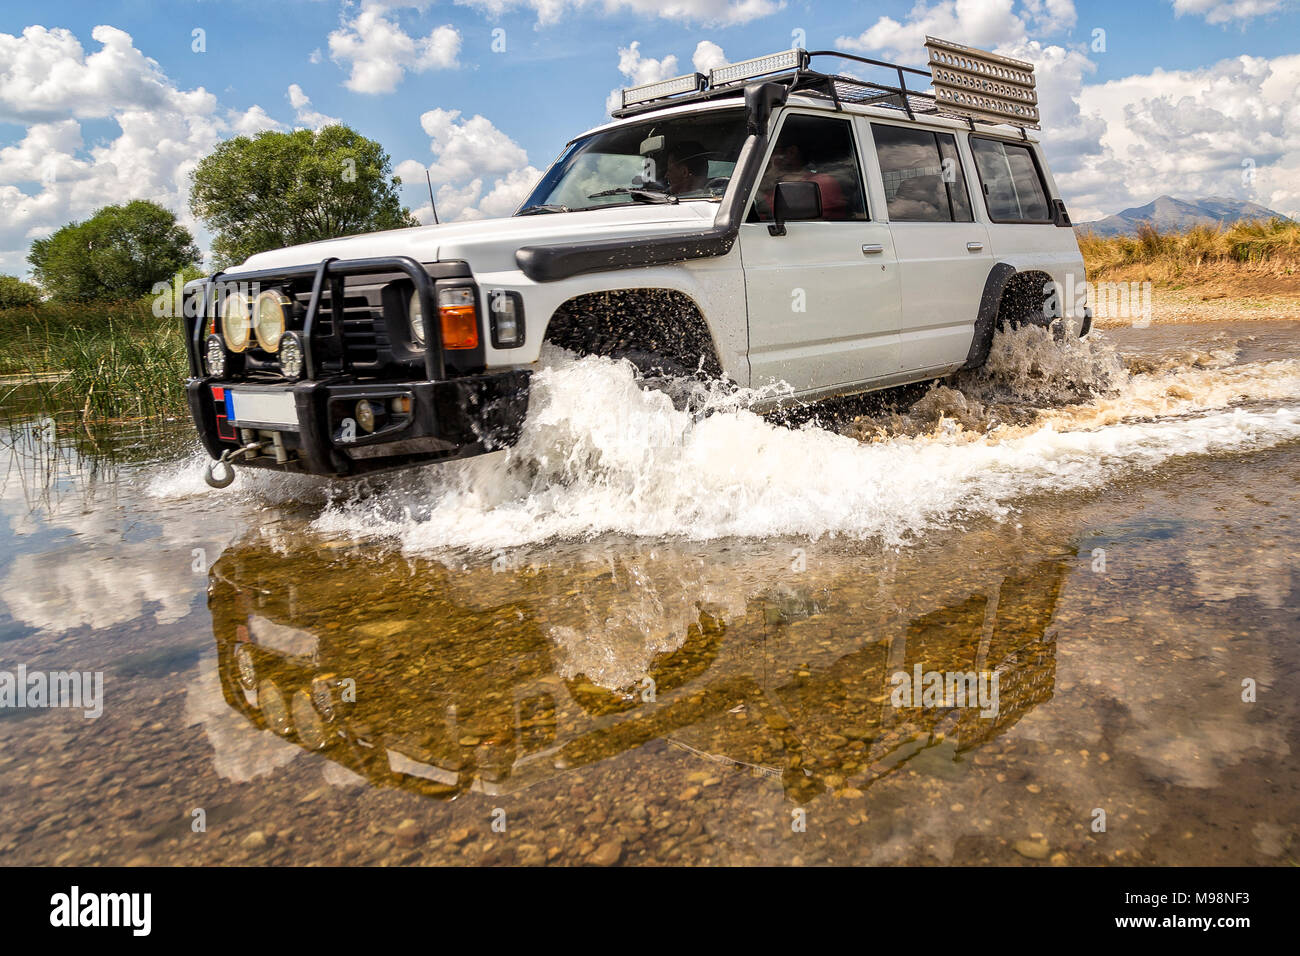 Off-road vehicle crossing river Stock Photo